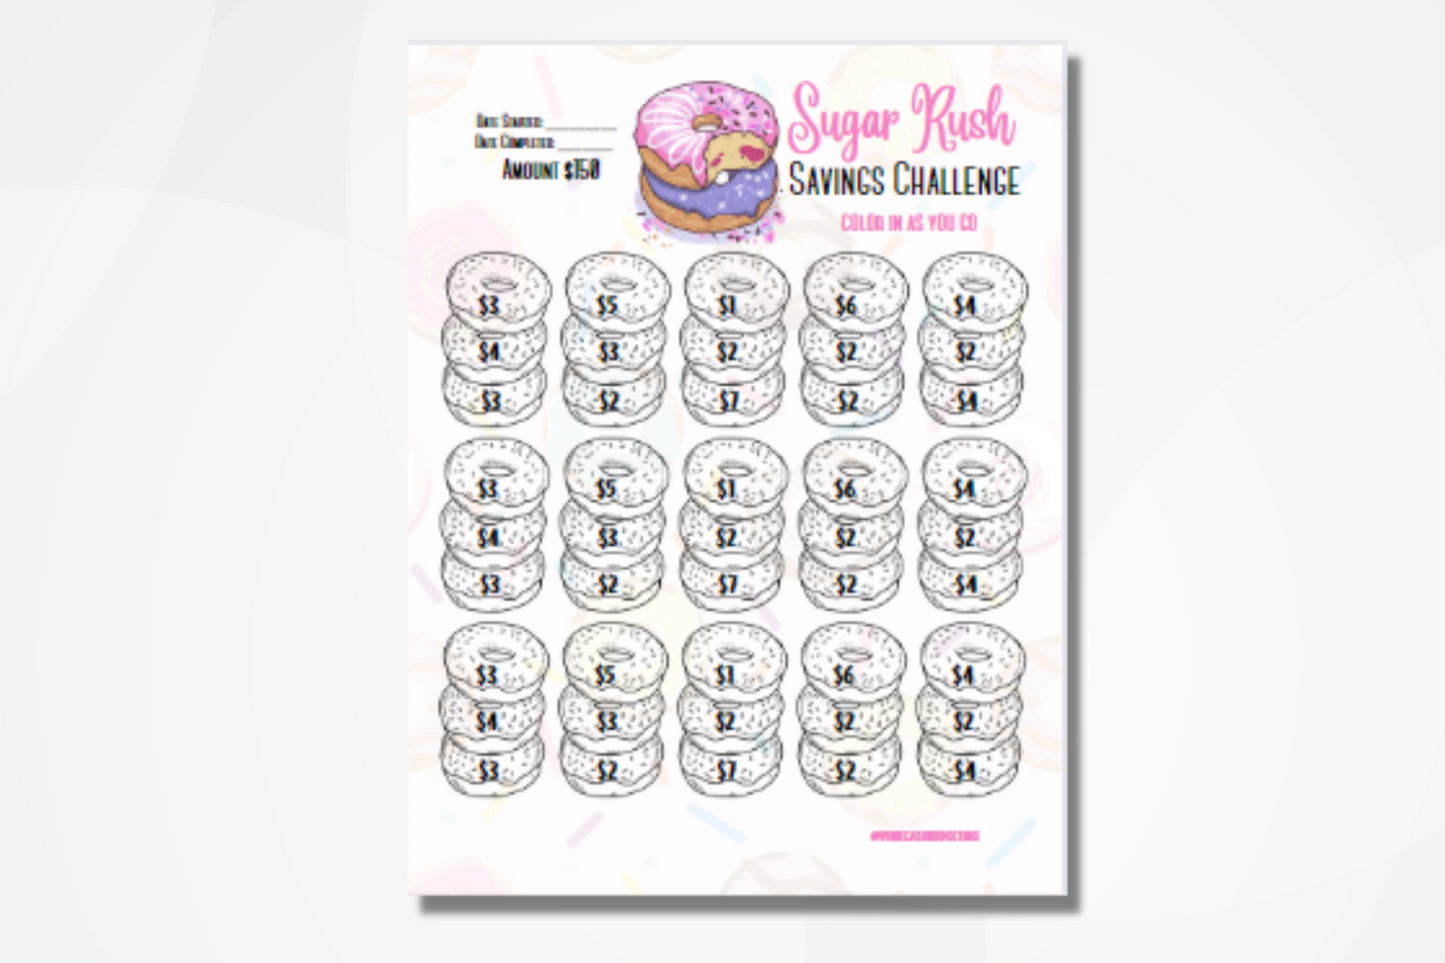 Instantly Download the Sugar Rush Savings Challenge and Start Saving Now